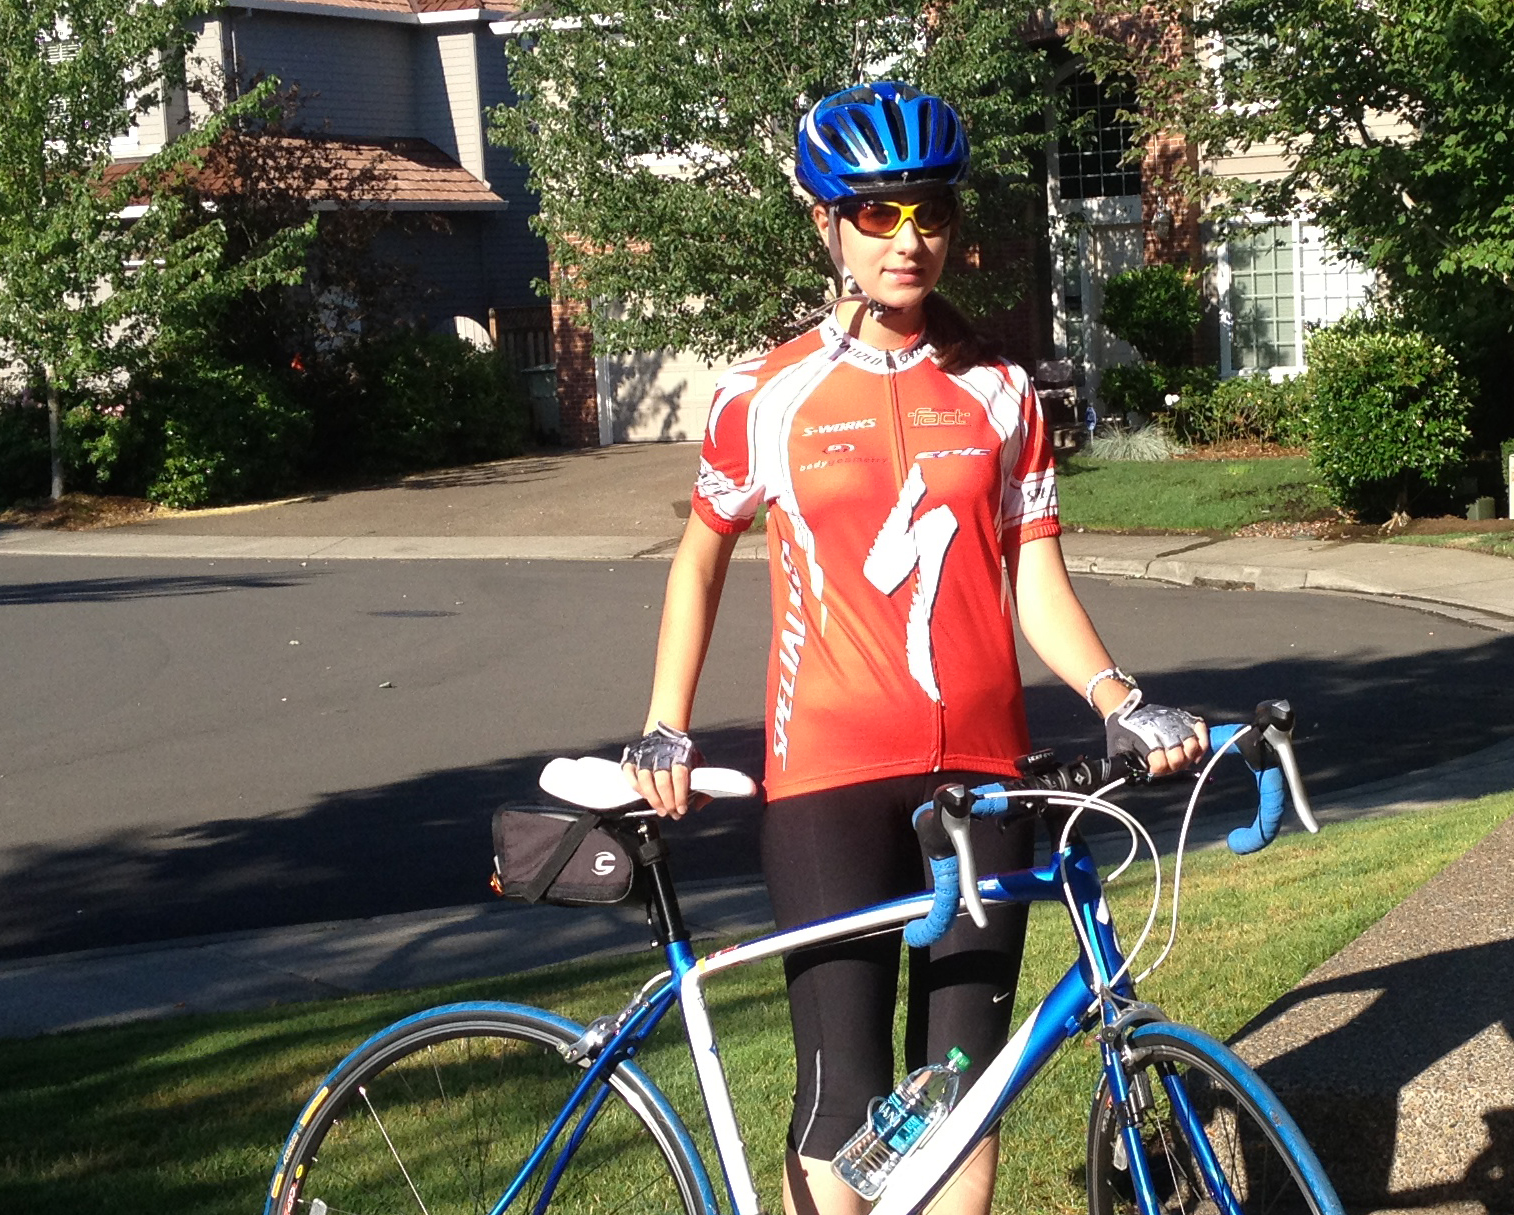 Gritta biked over 1,600 miles while working toward the 200 hours of Physical Activity required for the Gold Medal.